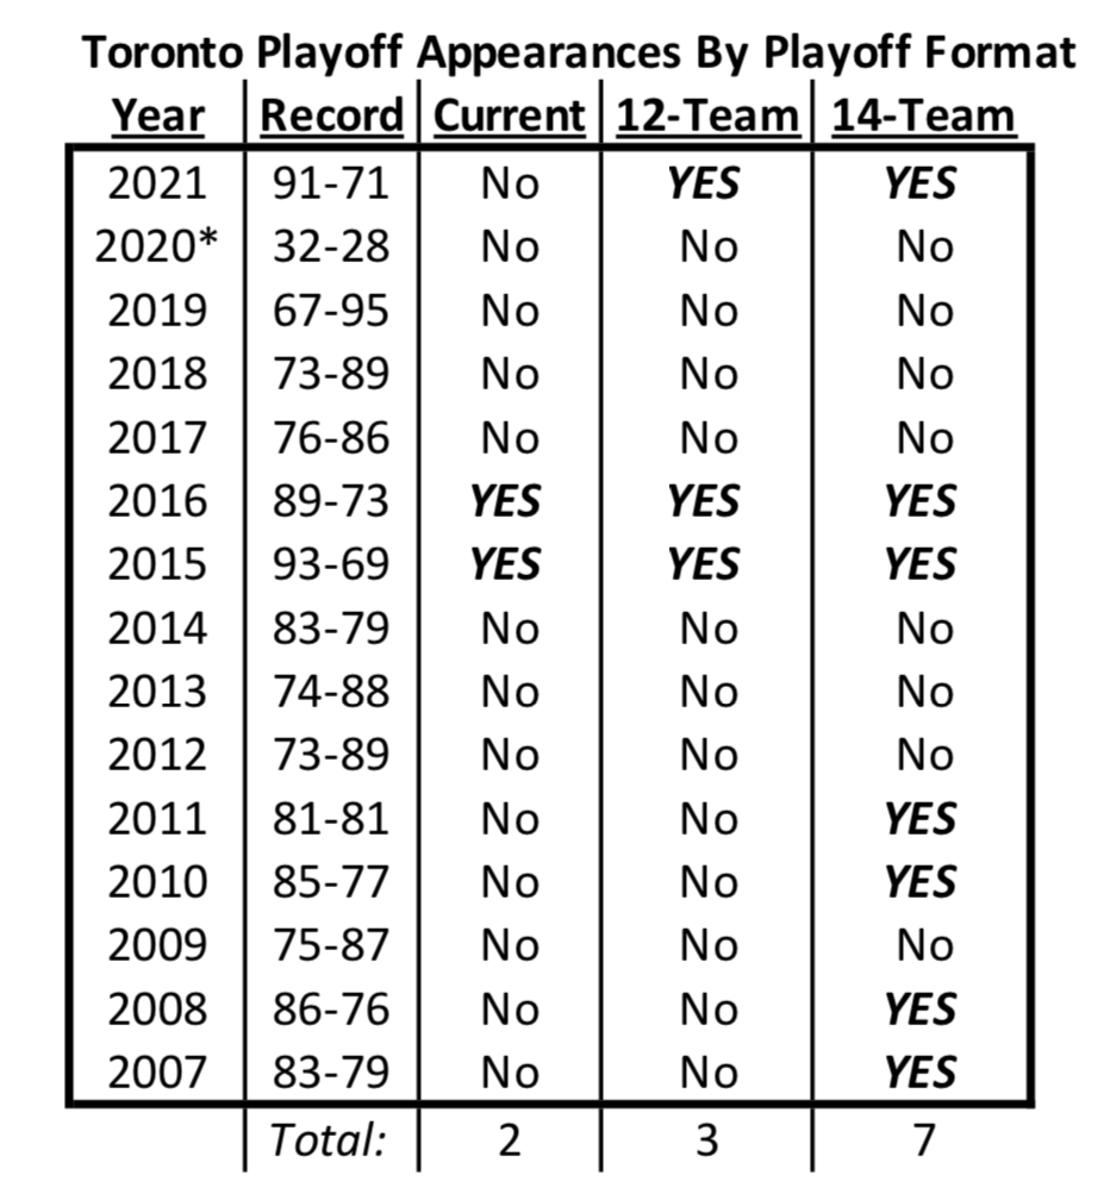 Last 15 Years of Blue Jays playoff appearances based on the current playoff format and proposed 12- and 14-team postseason formats